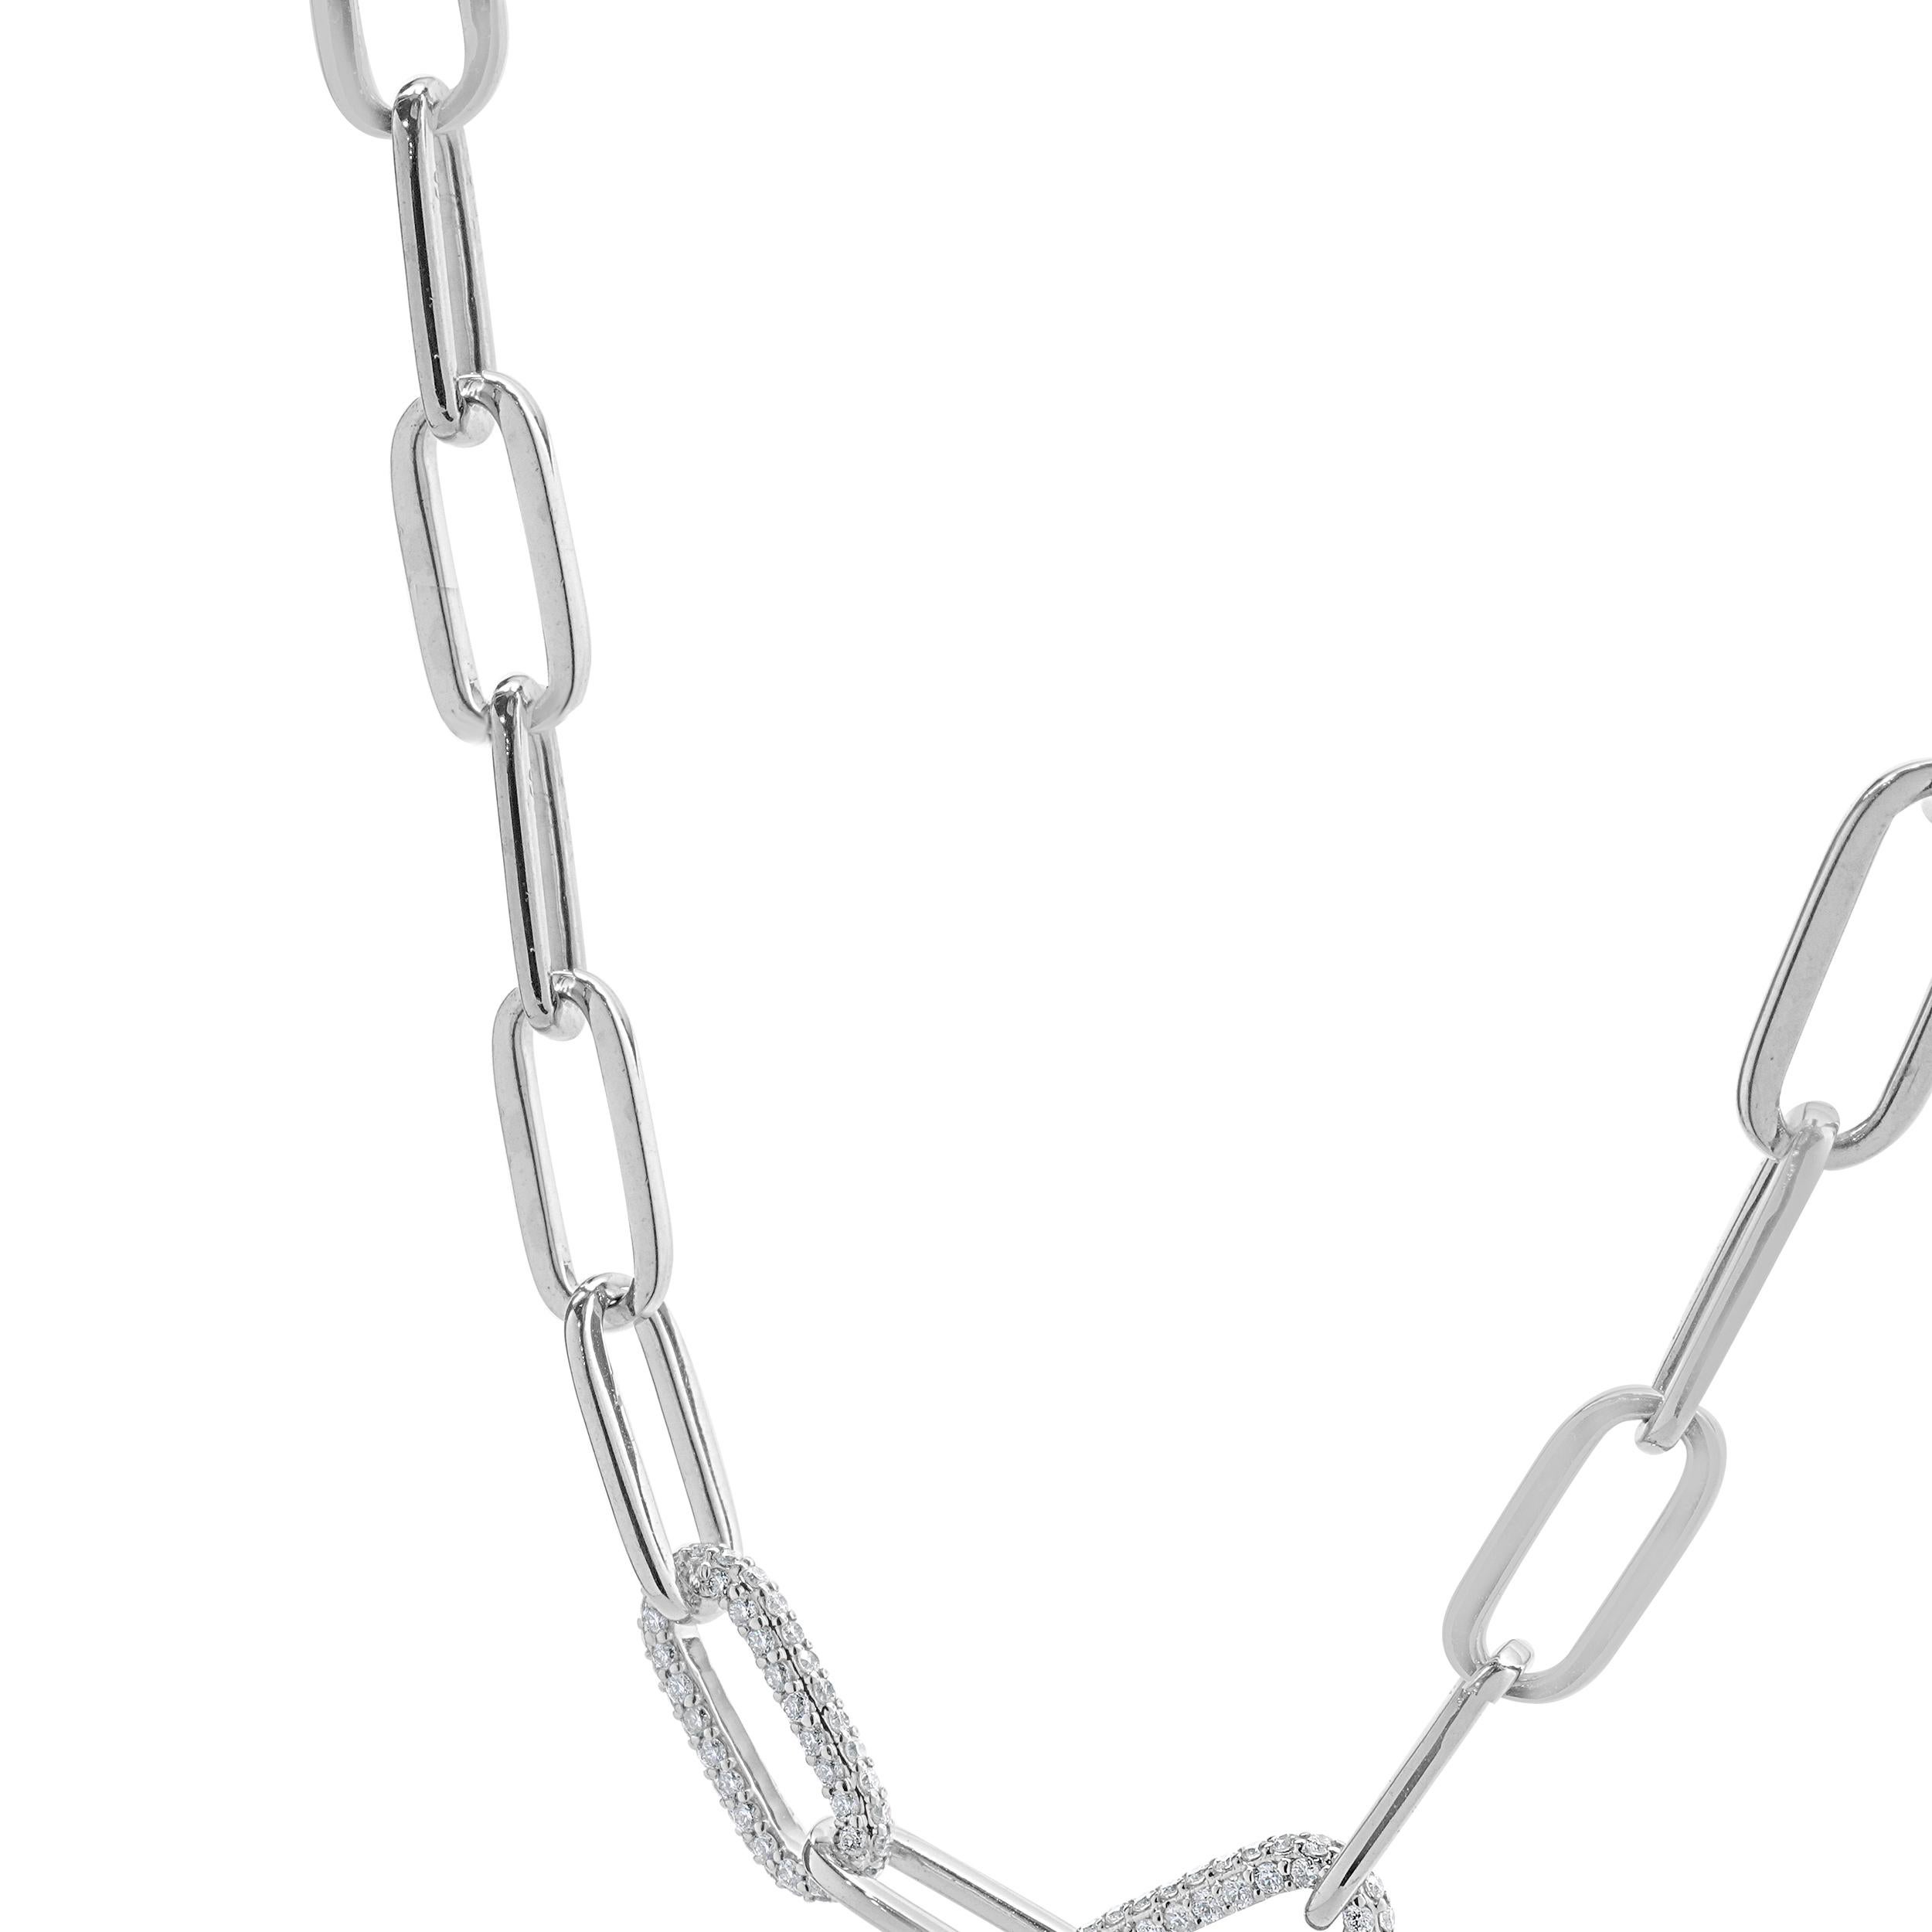 Designer: custom
Material: 18K white gold
Diamonds: 720 round brilliant cut = 2.61cttw
Color: G 
Clarity: VS1-2
Dimensions: necklace measures 18-inches in length 
Weight: 13.50 grams
